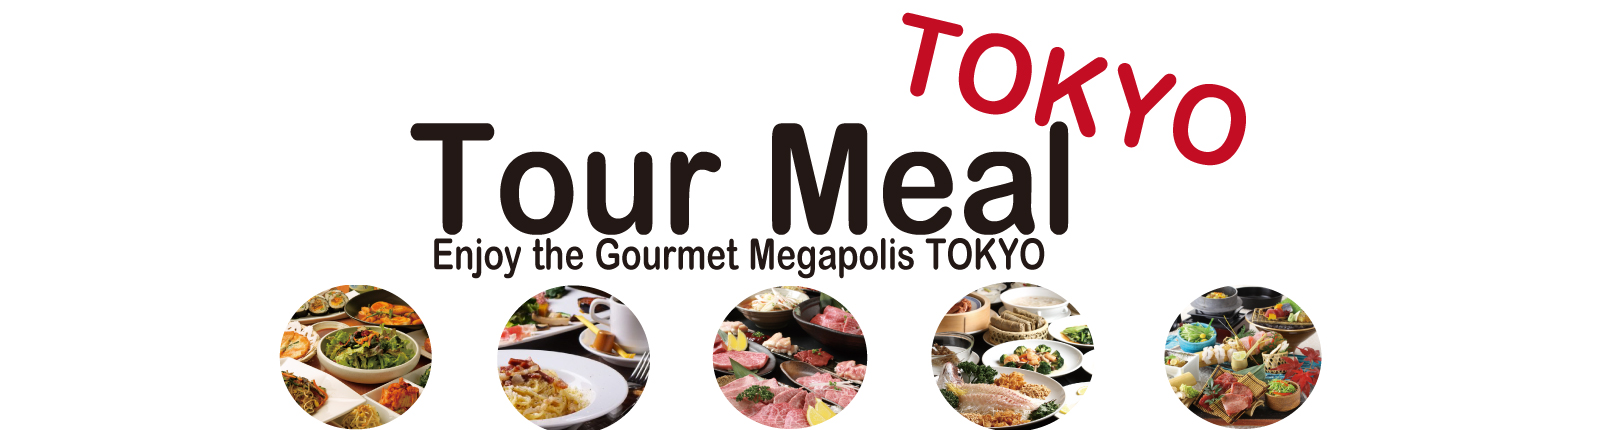 Tour Meal Tokyo - The Best Gourment Experience in Tokyo.